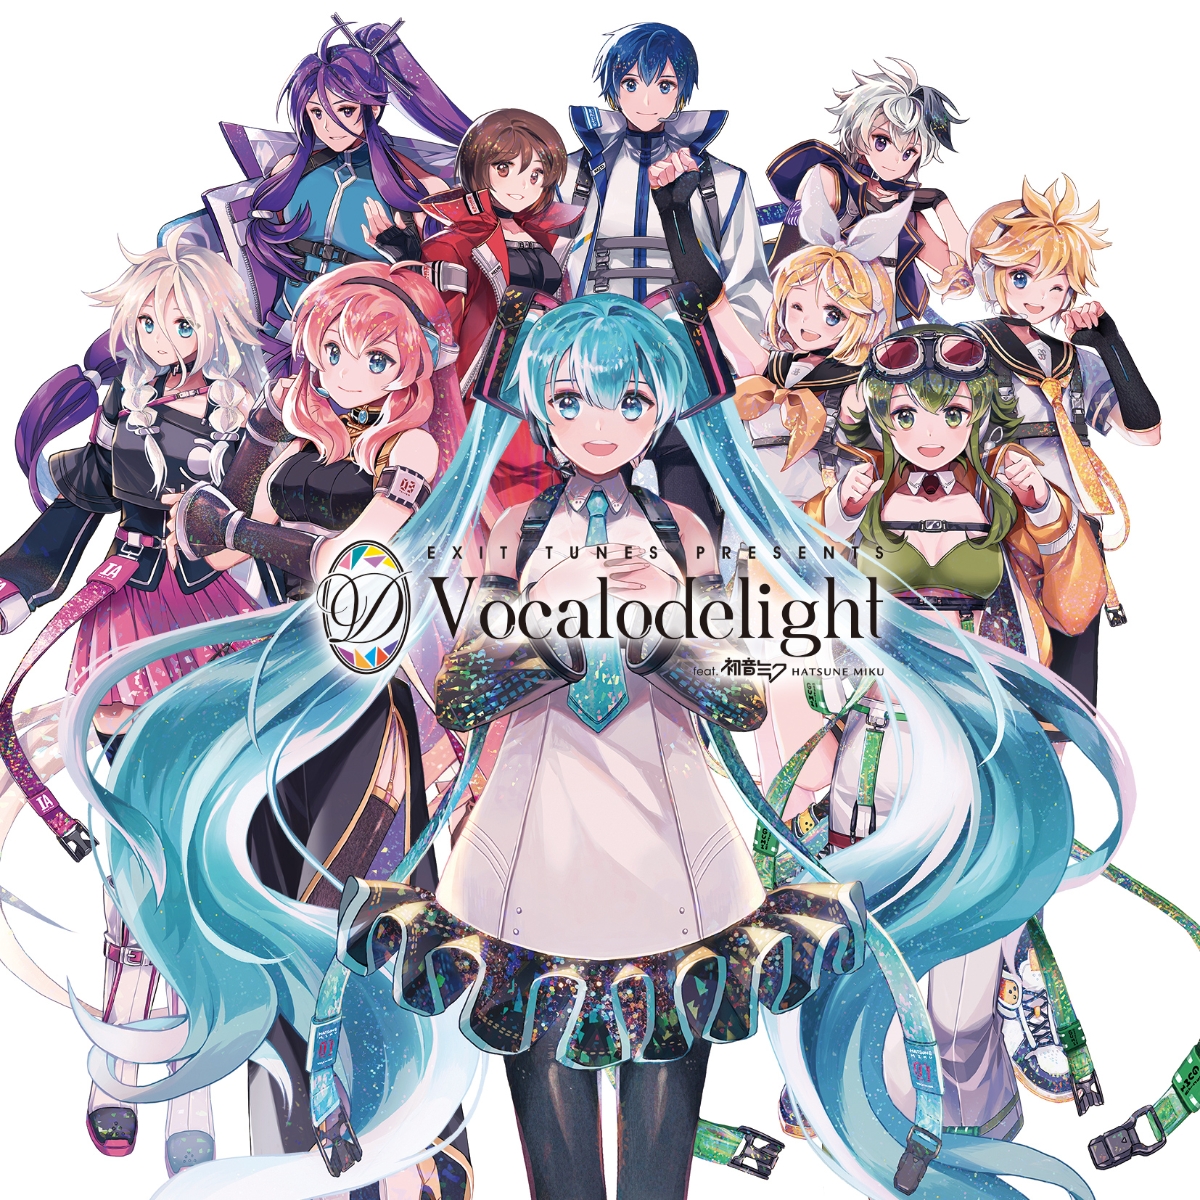 EXIT TUNES PRESENTS Vocalodelight feat. 初音ミク画像